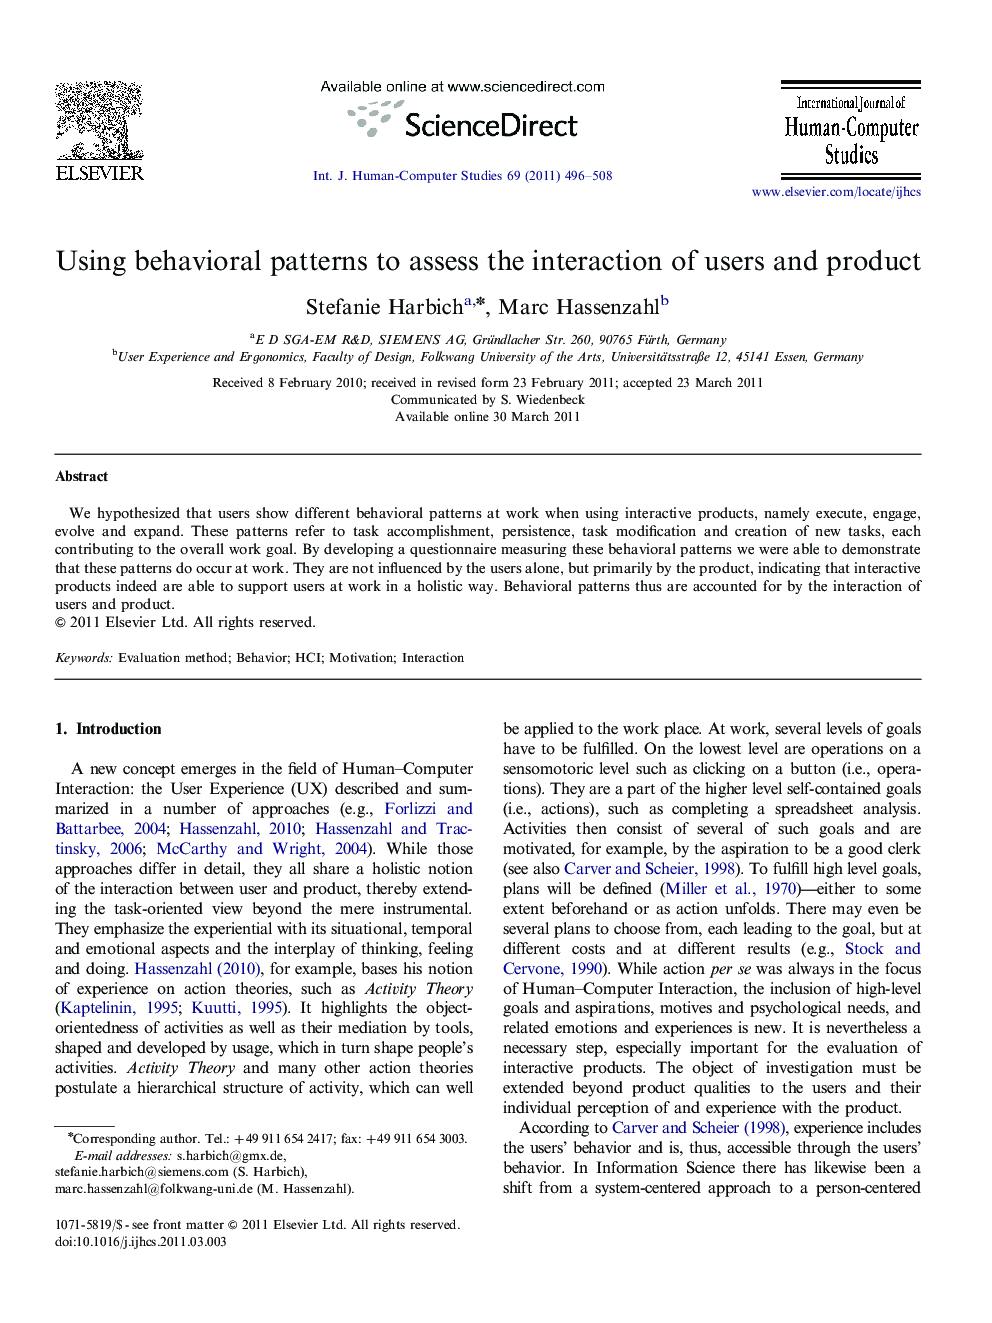 Using behavioral patterns to assess the interaction of users and product